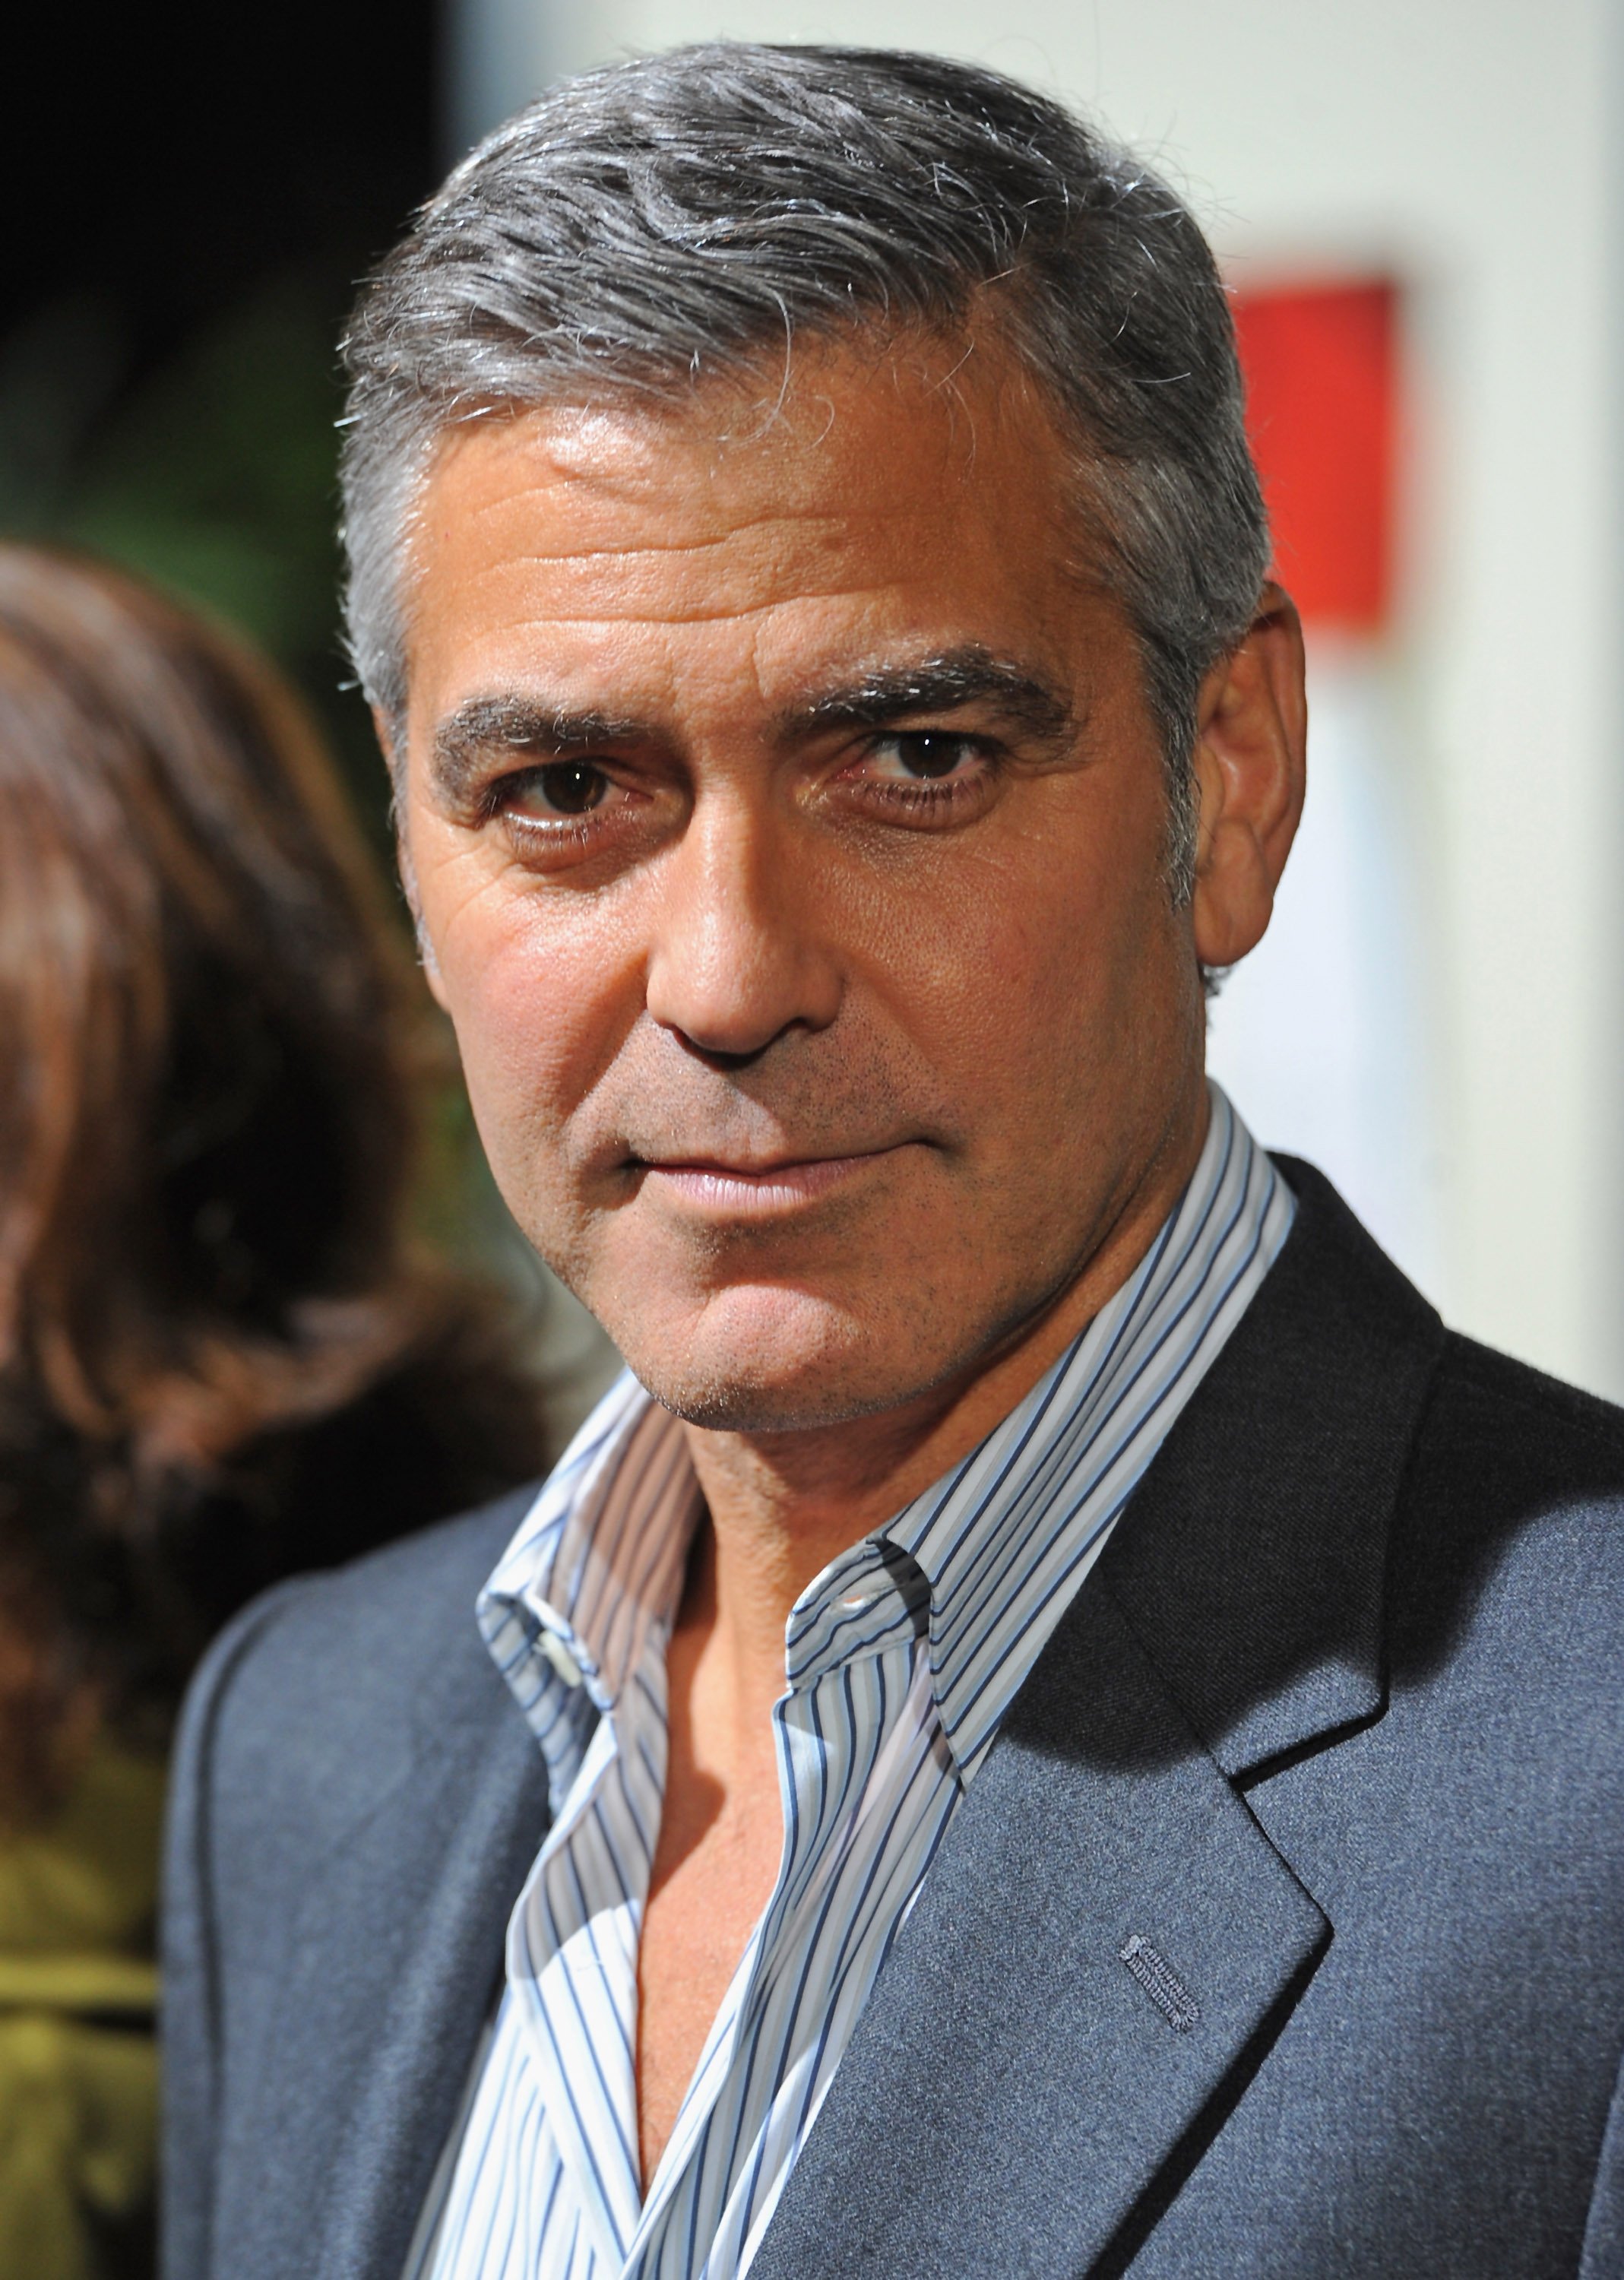 George Clooney. I Image: Getty Images.